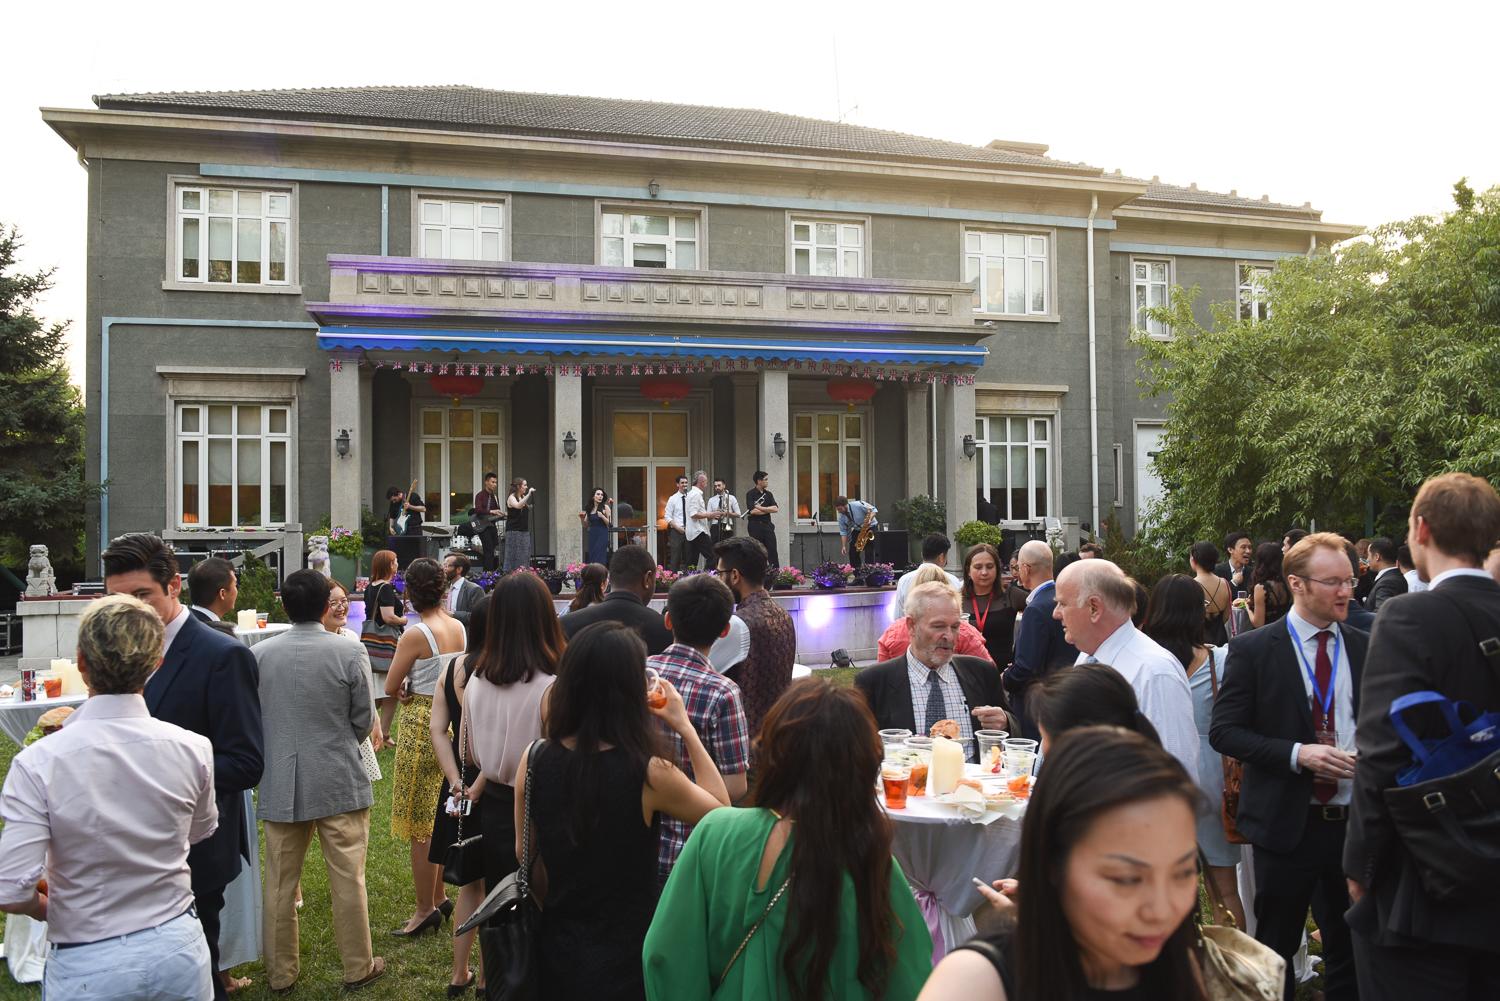  Three Cheers for Summer at This Year&#039;s BritCham Summer Garden Party, Jun 7